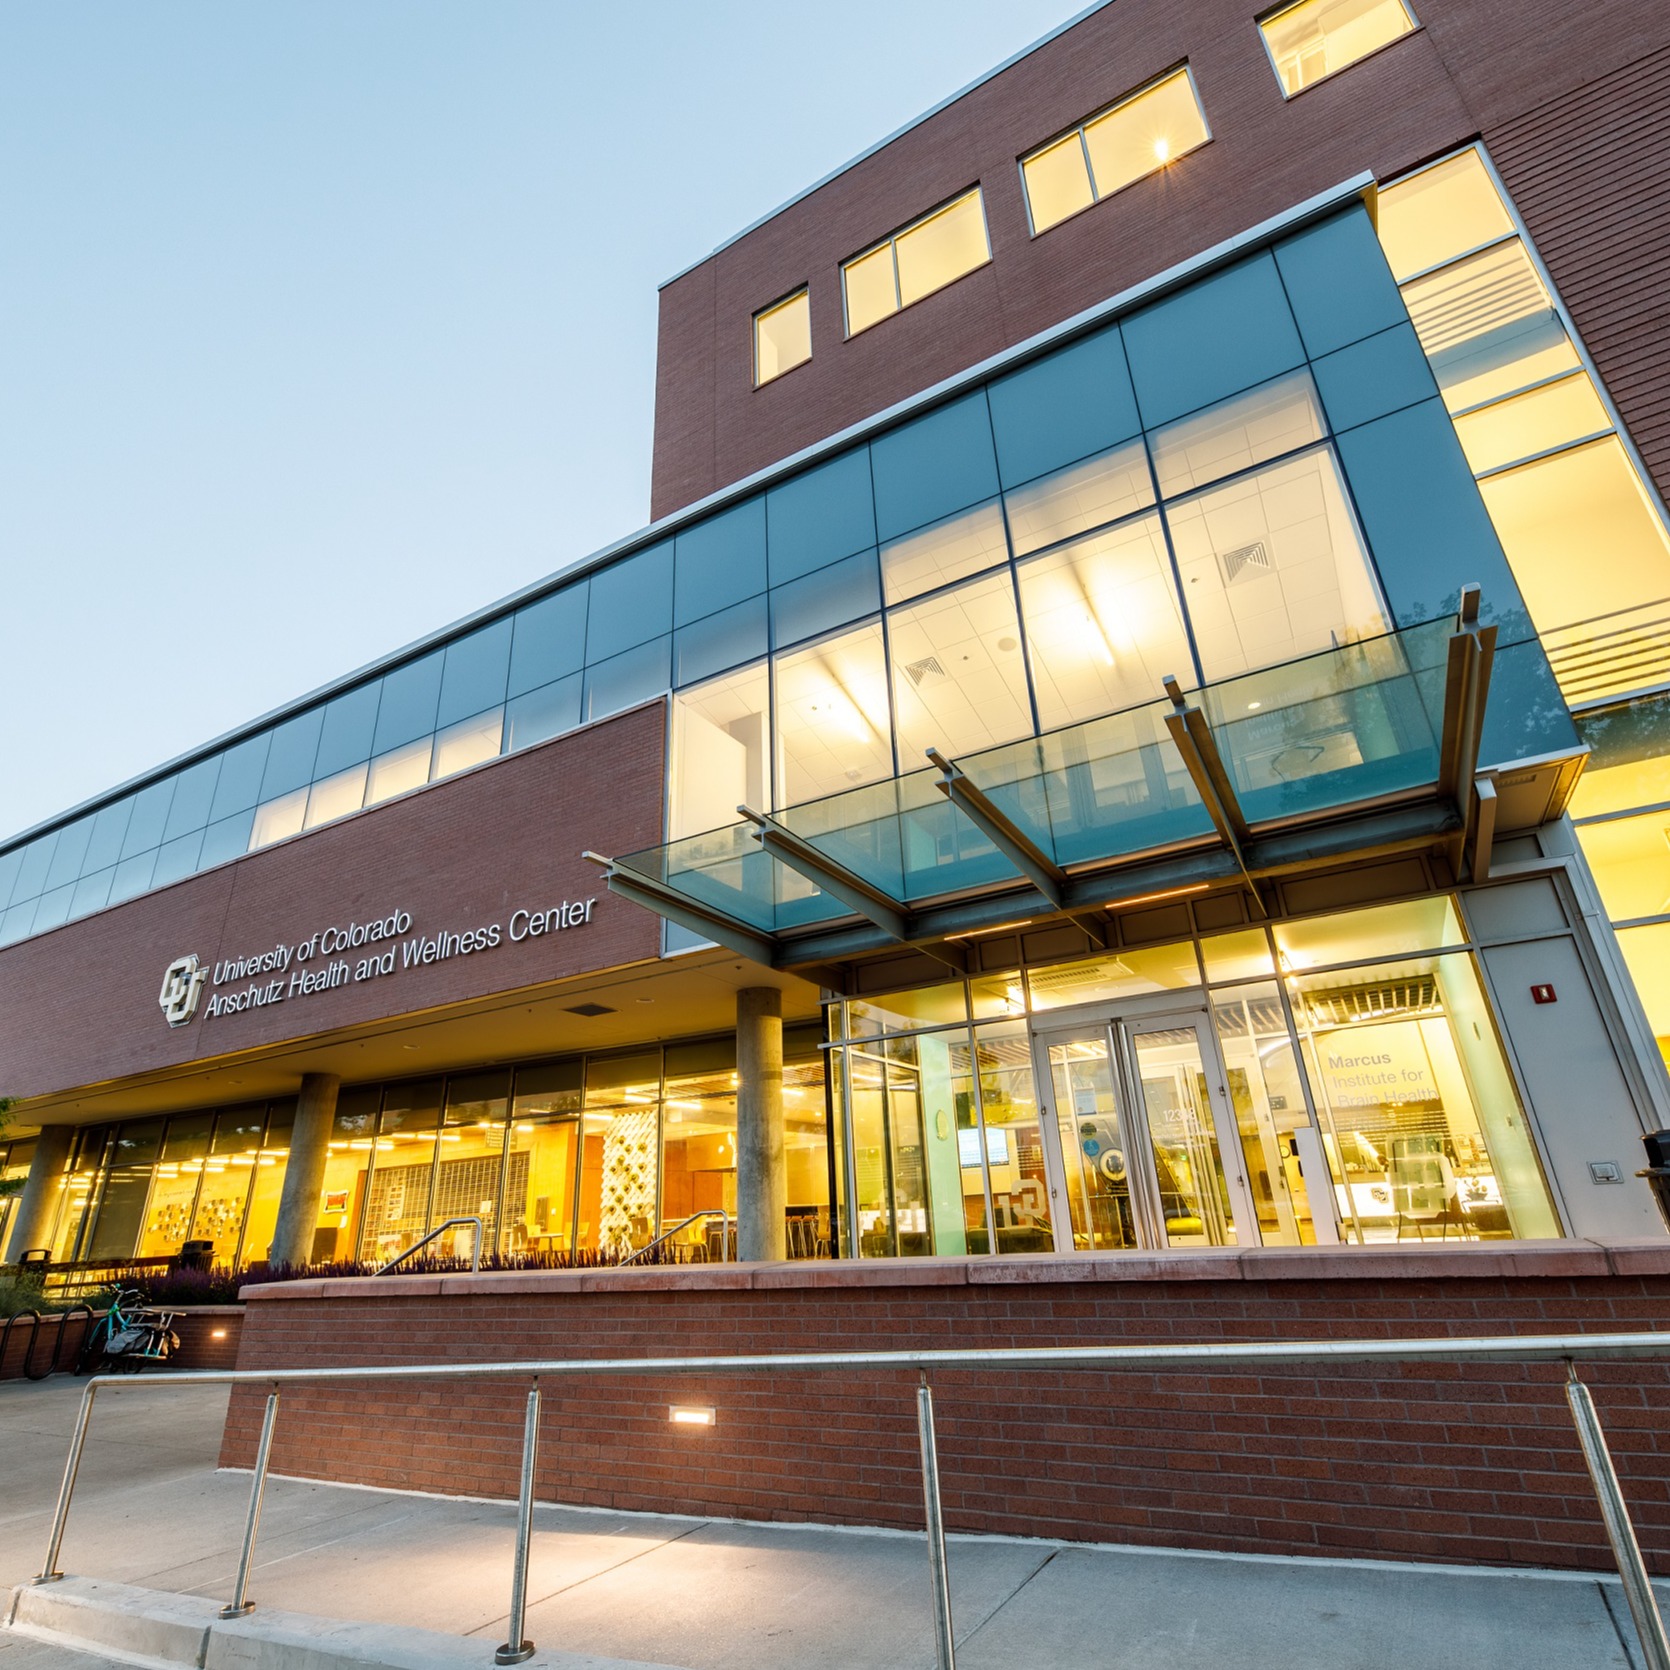 Image of the University of Colorado Anschutz Health and Wellness Center building